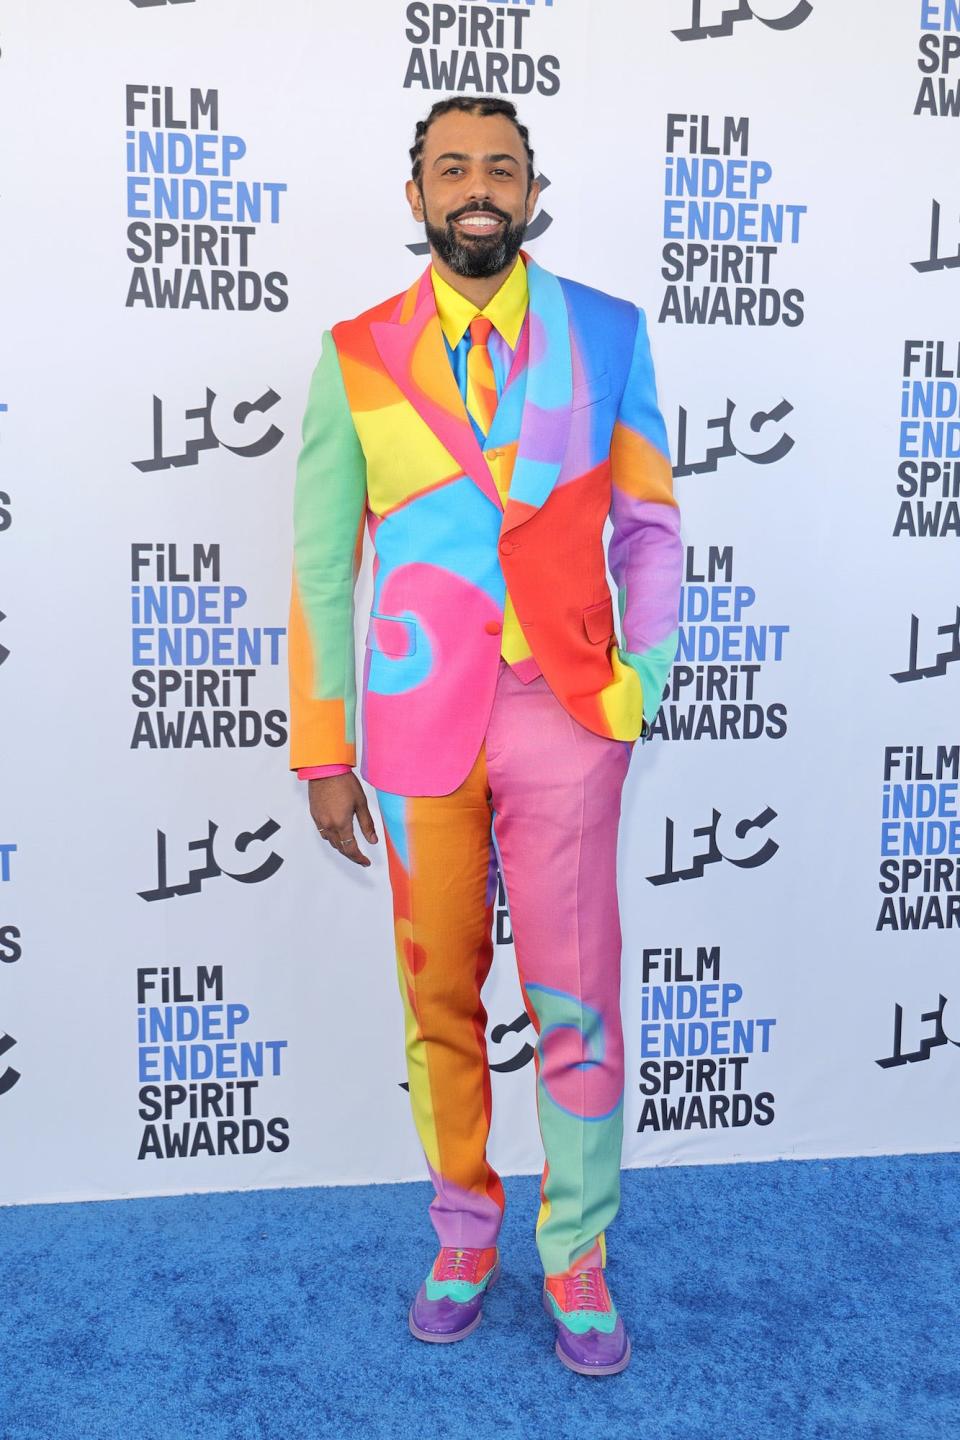 Daveed Diggs at the Film Independent Spirit Awards on March 6, 2022.